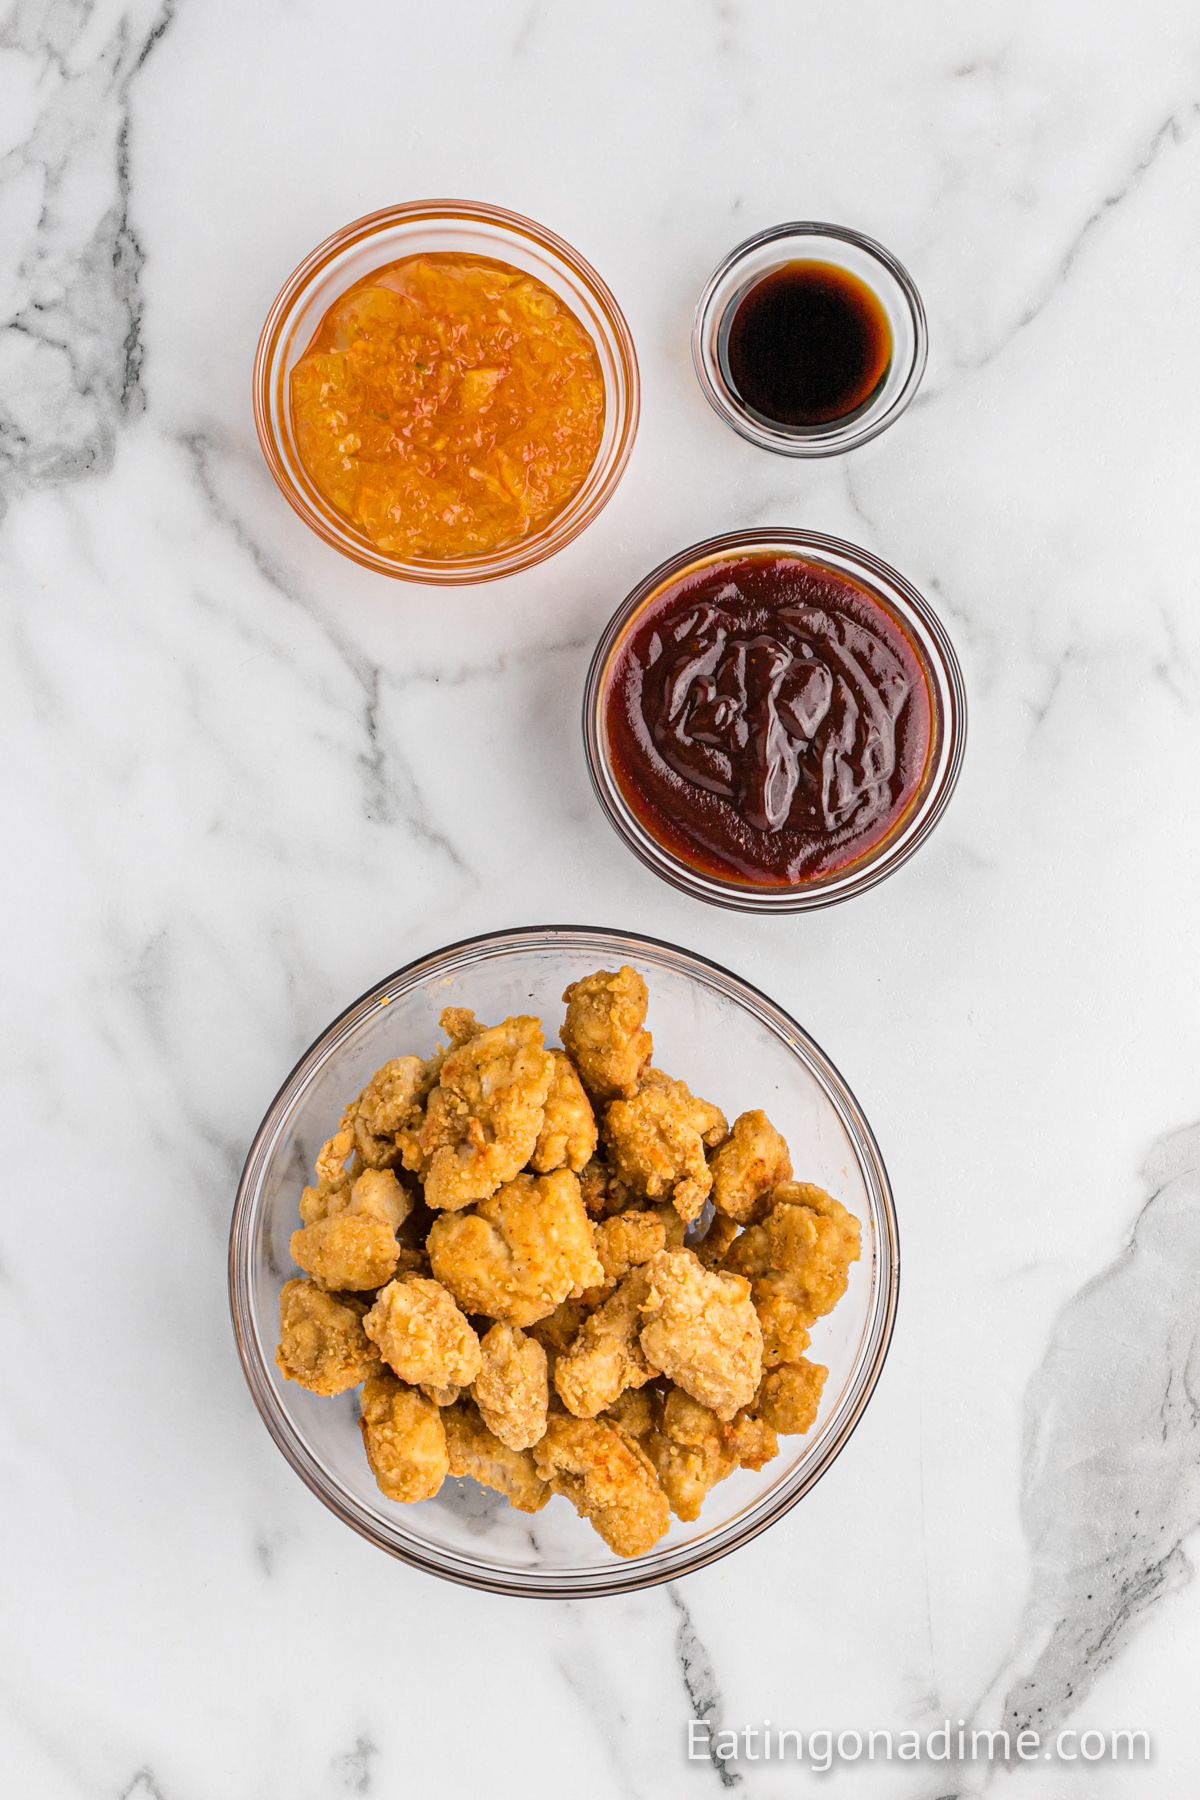 Ingredients needed - pre-made chicken nuggets, orange marmalade, barbecue sauce, soy sauce